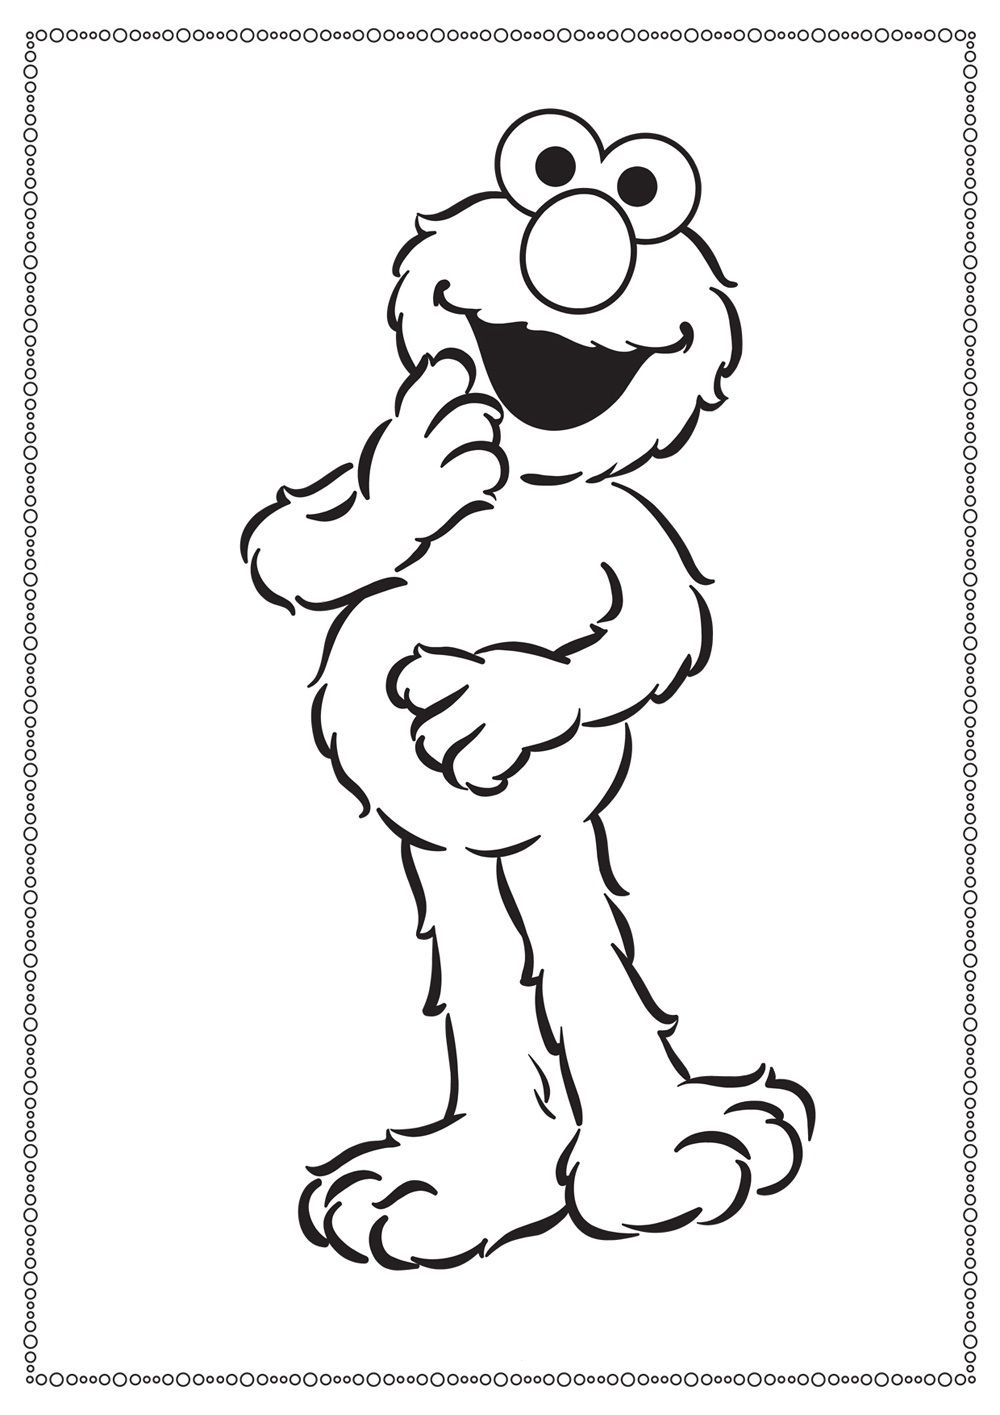 Free Printable Elmo Coloring Pages For Kids | Diy | Elmo Coloring - Elmo Color Pages Free Printable